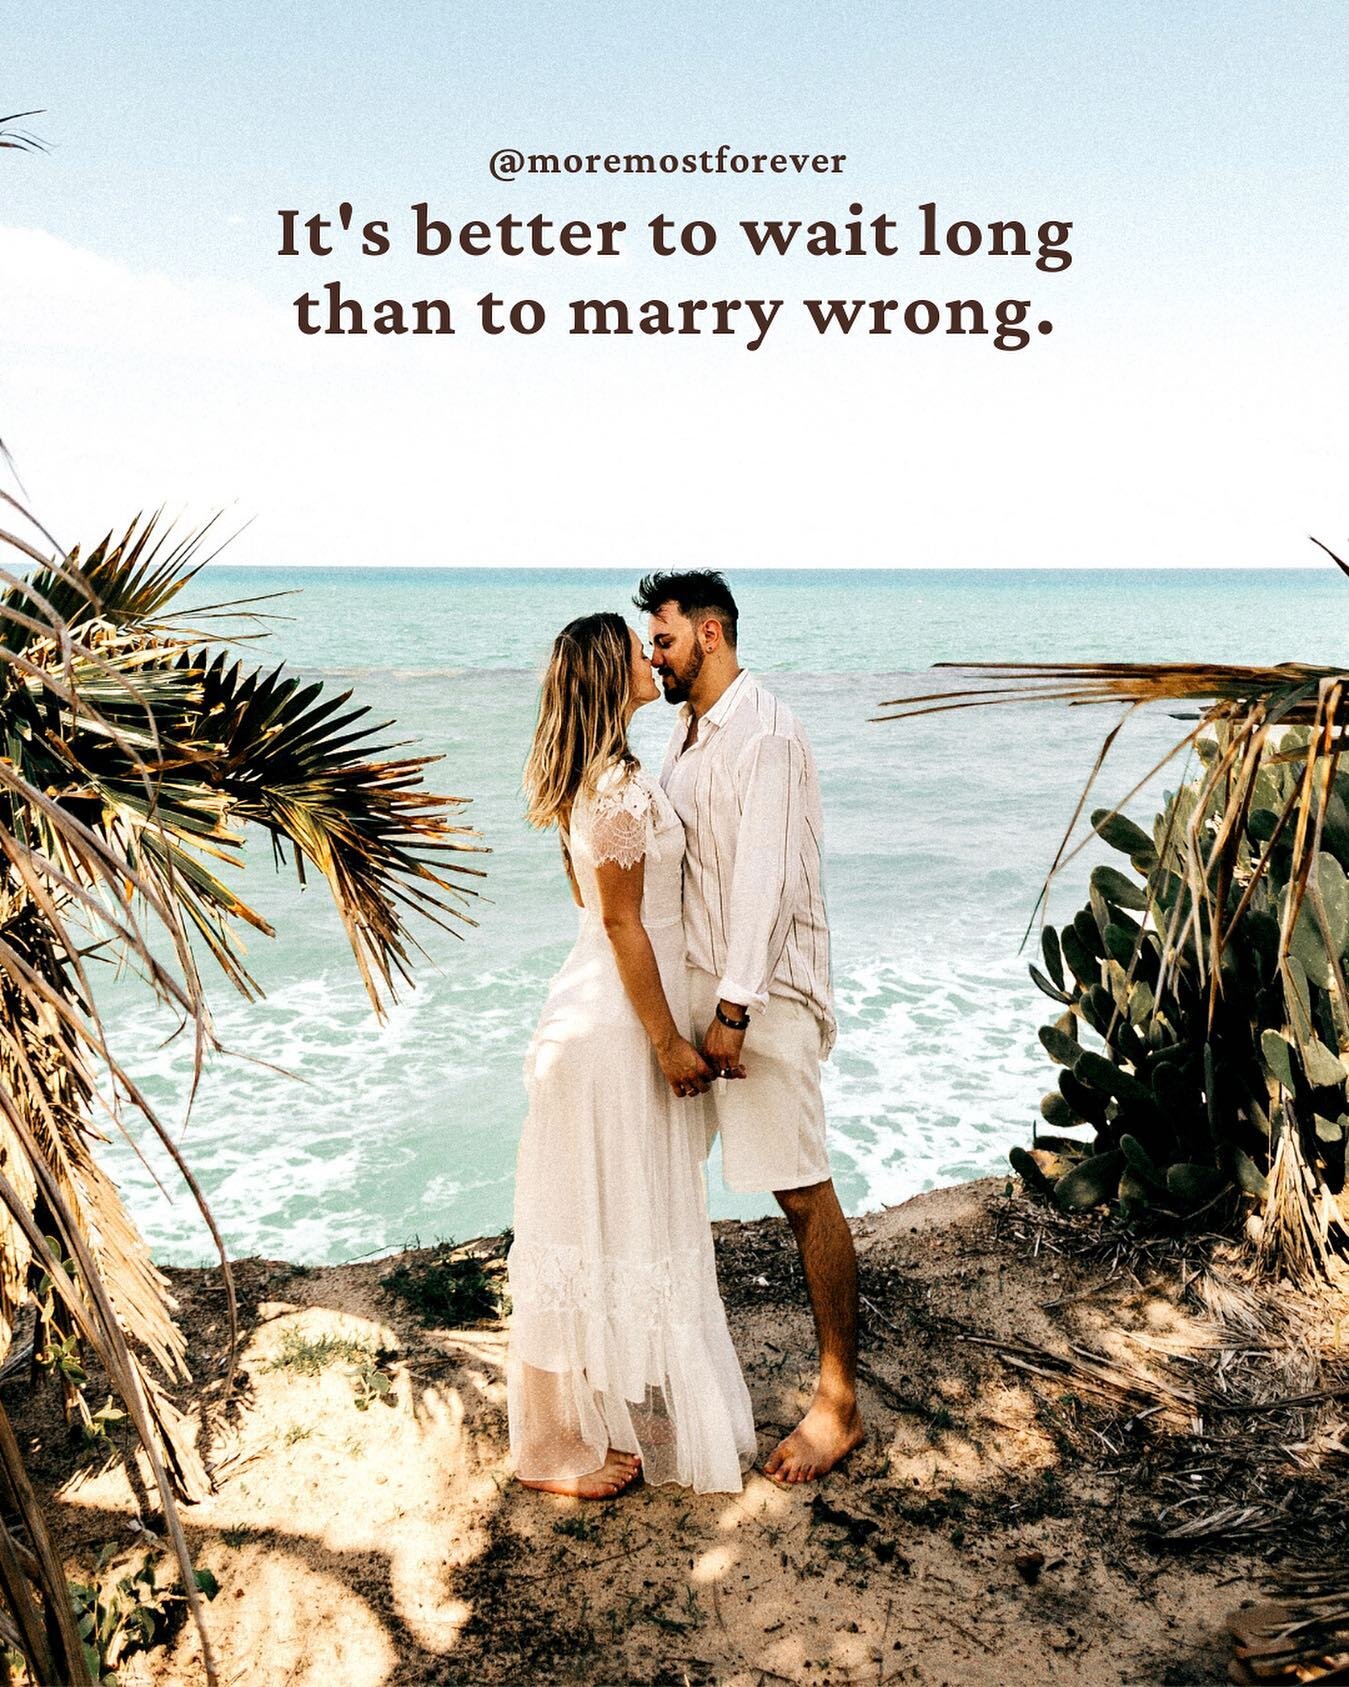 There is a great reward for those who wait on the Lord. And waiting means preparing, praying, and serving God. 

#godlydating #godlycourting #dating #godlyrelationships #faith #godlymarriage #datingtips #relationshipgoals #couples #relationships #rel